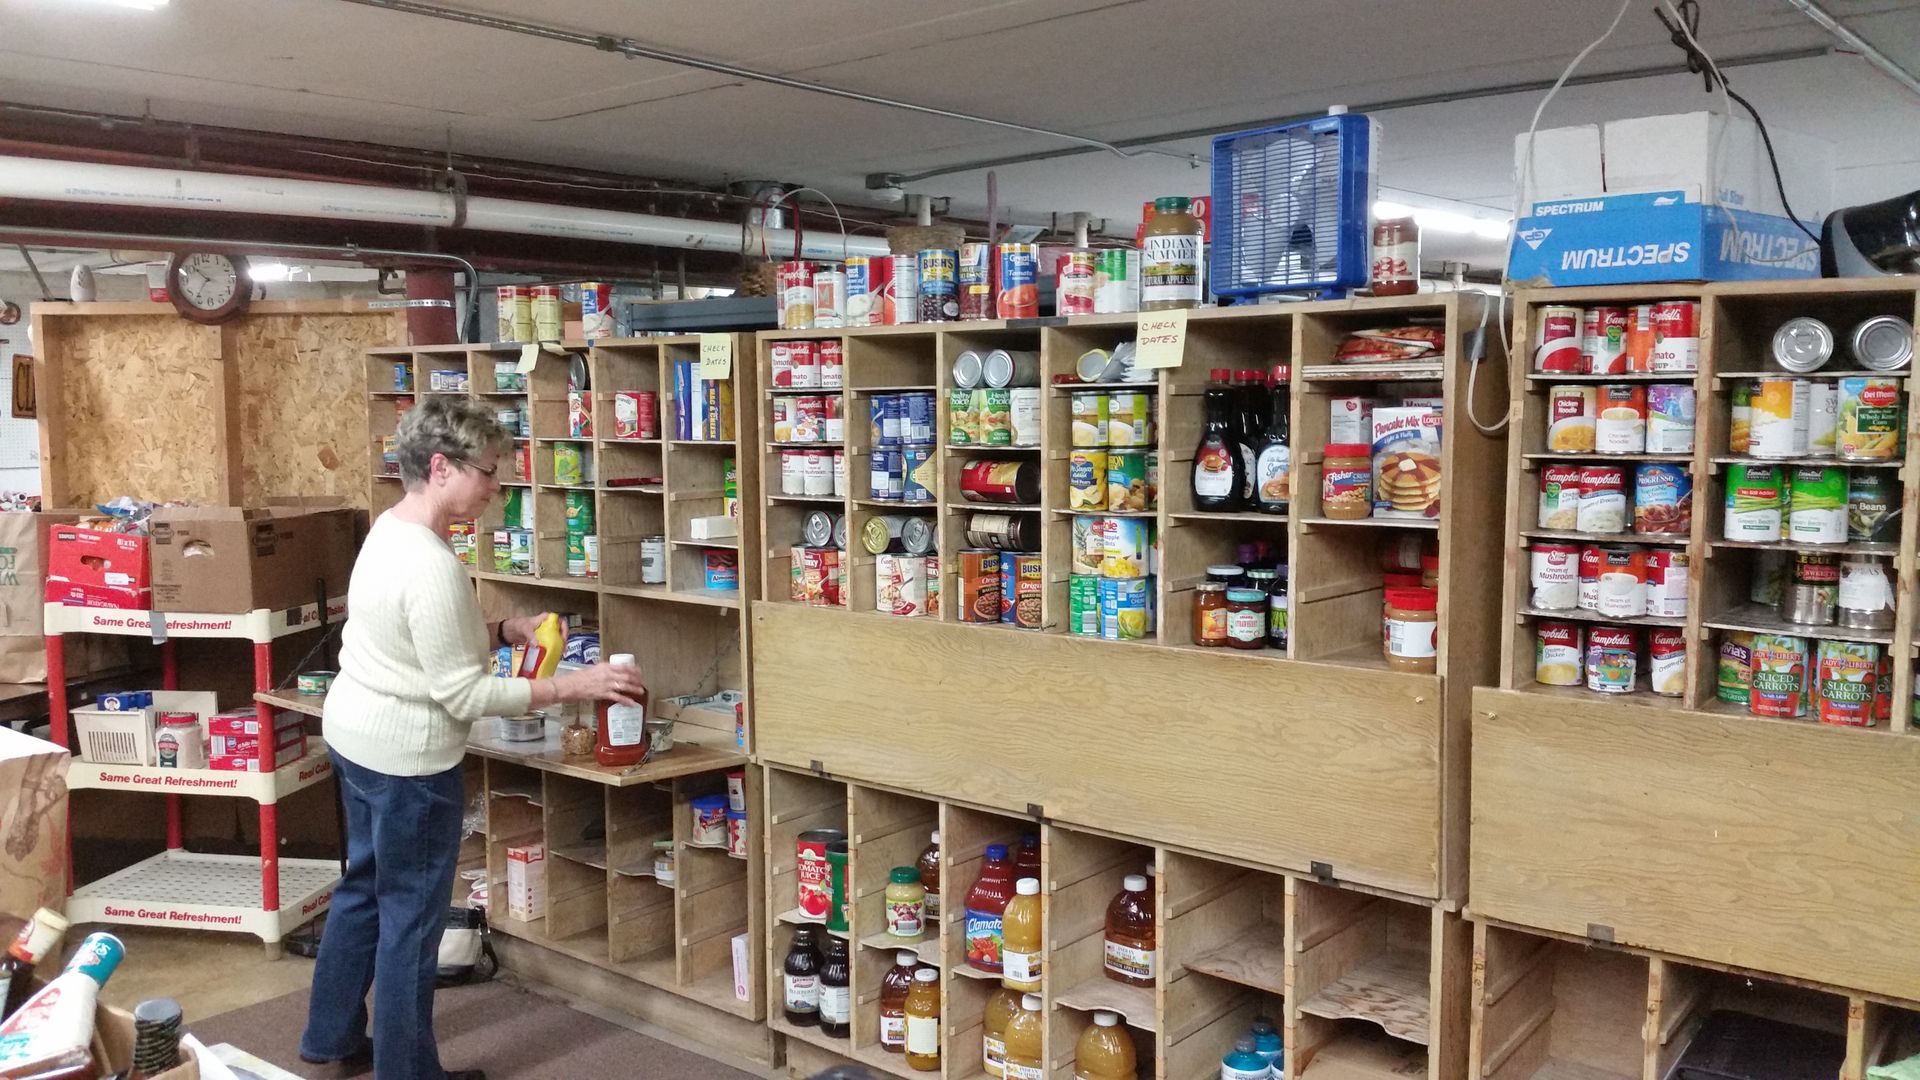 Downers Grove Area Food Pantry and Clothes Closet